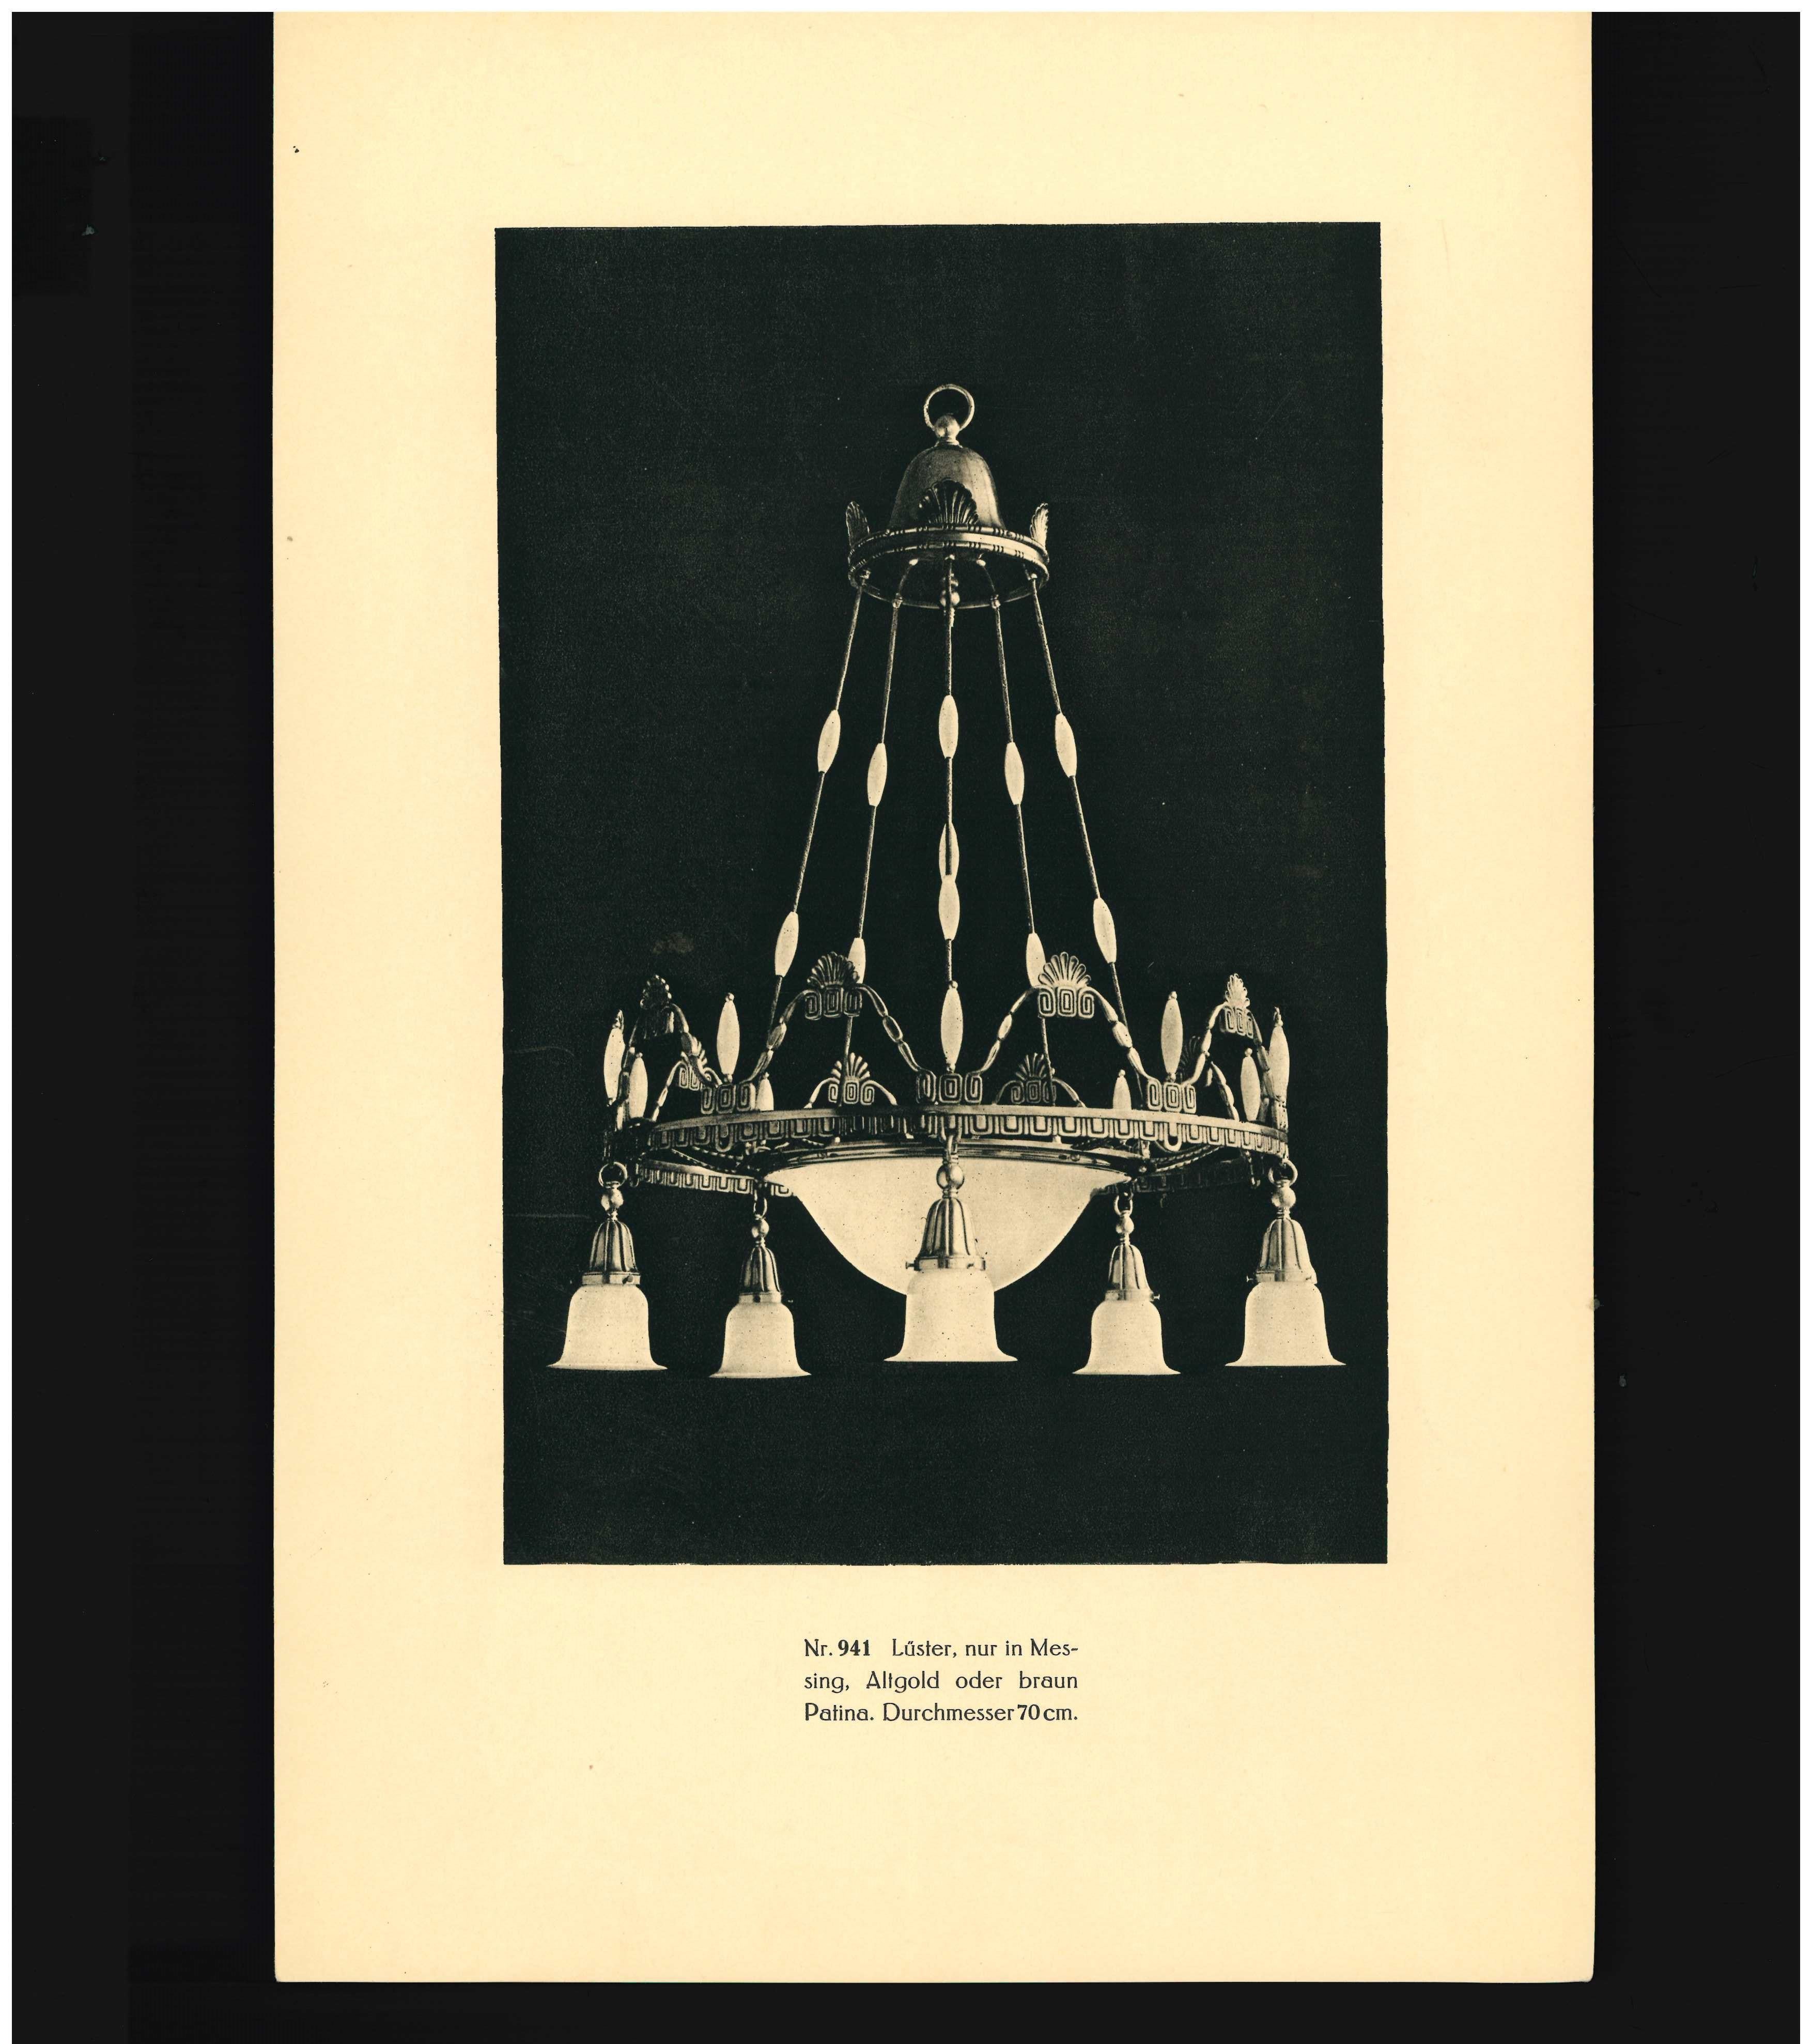 Paper Reinhold Kirsch, German Early 20th Century Electric Lighting Catalogue (Book) For Sale